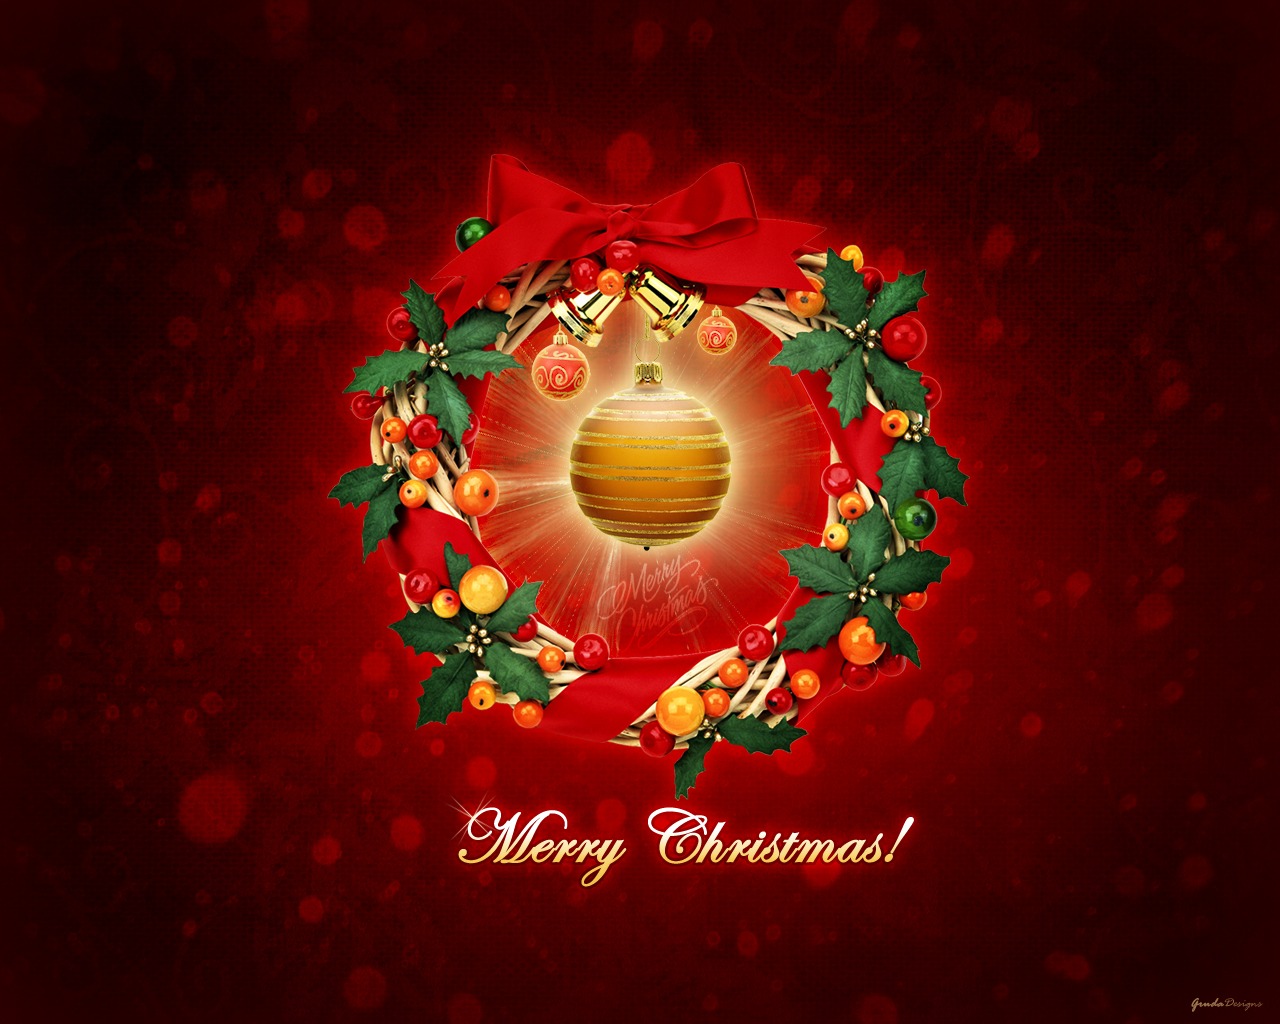 Merry Bright Christmas Wallpapers HD Wallpapers